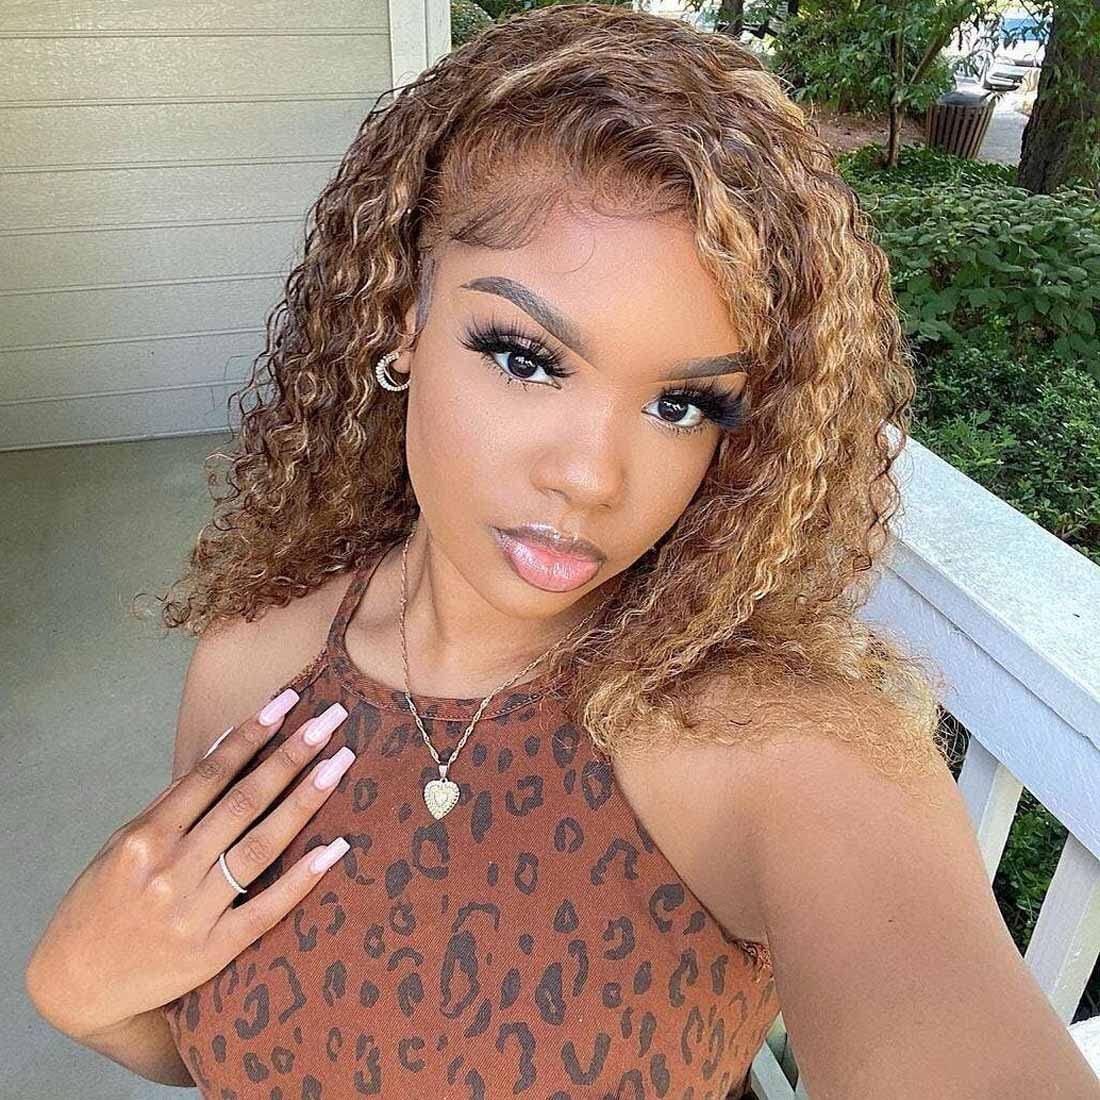 Beauty Forever #TL412 Curly Highlight Lace Front Wig Human Hair,10A  Brazilian Remy Hair Honey Blonde 13x4 Lace Frontal Wigs for Black Women Pre  Plucked 150% Density 22 inch 22 Inch #TL412 curly